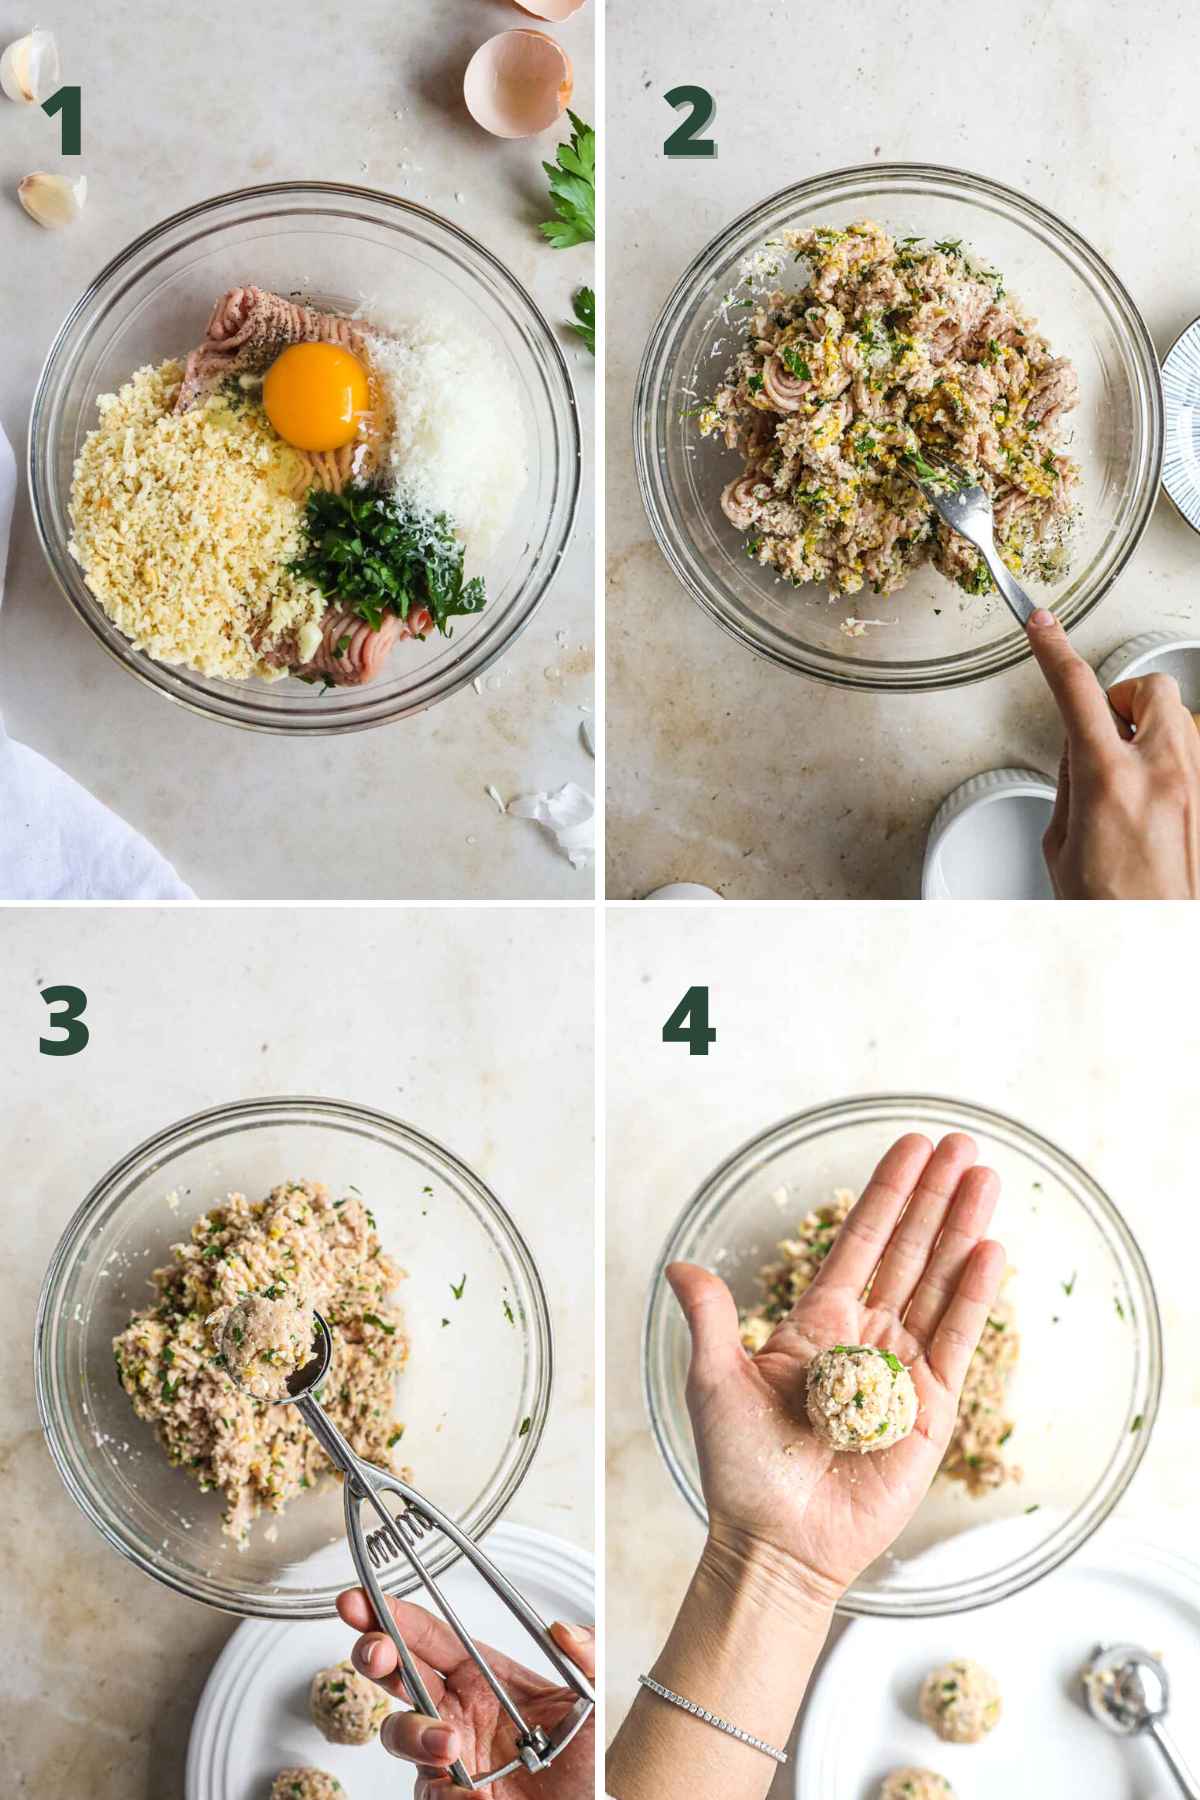 Steps to make healthy baked turkey meatballs, mixing turkey, egg, panko, garlic, and herbs in a bowl and forming into meatballs.